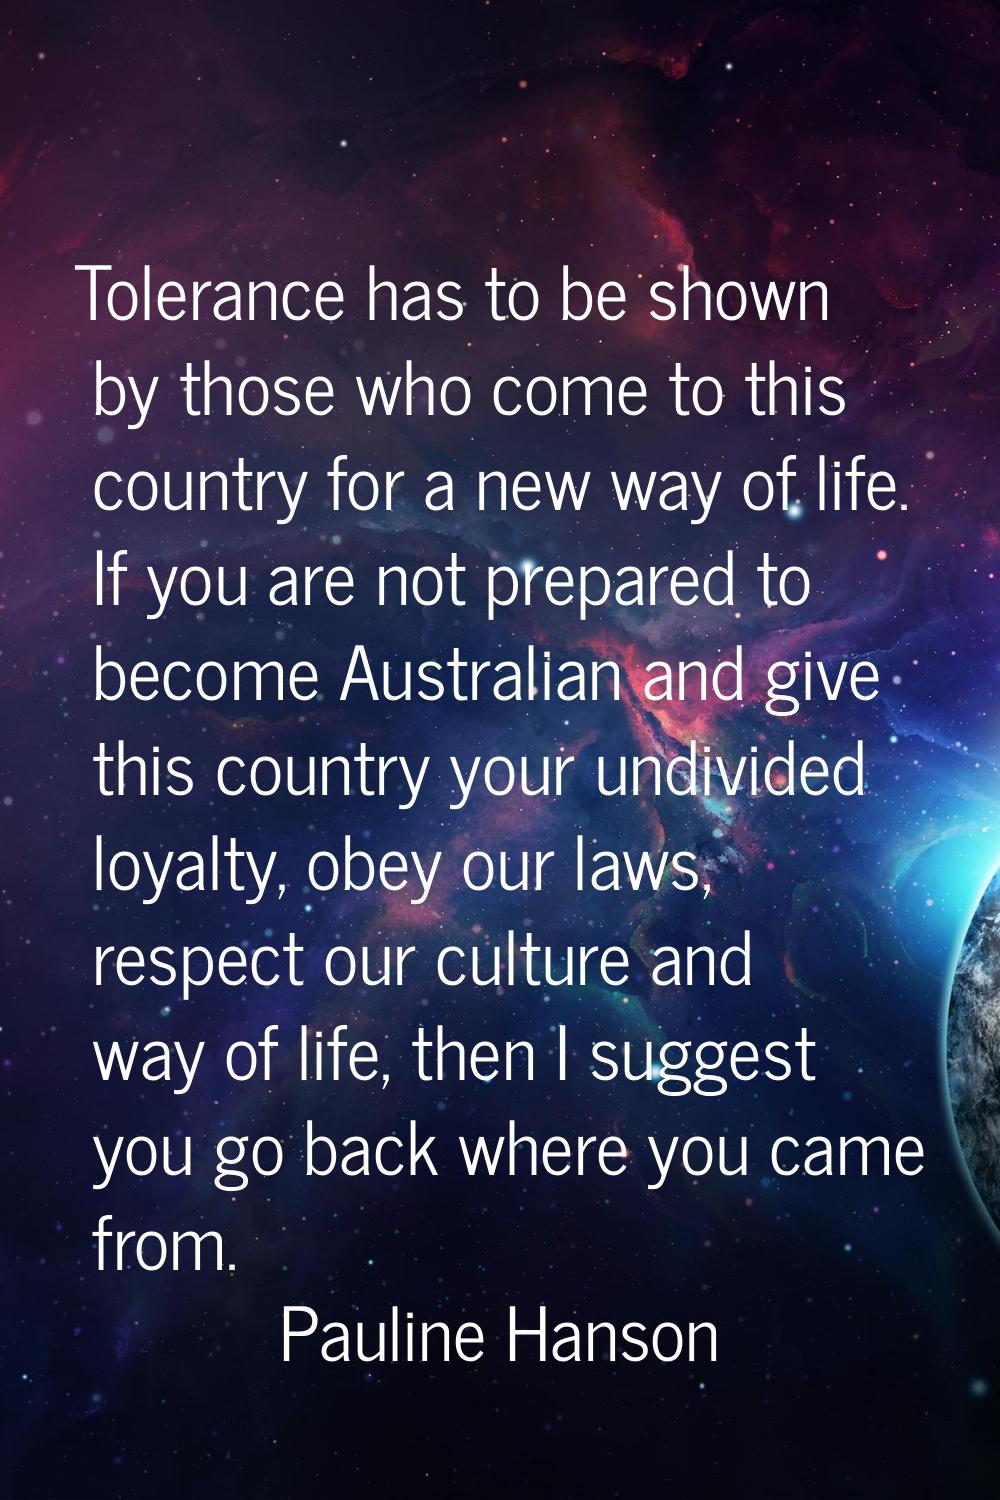 Tolerance has to be shown by those who come to this country for a new way of life. If you are not p